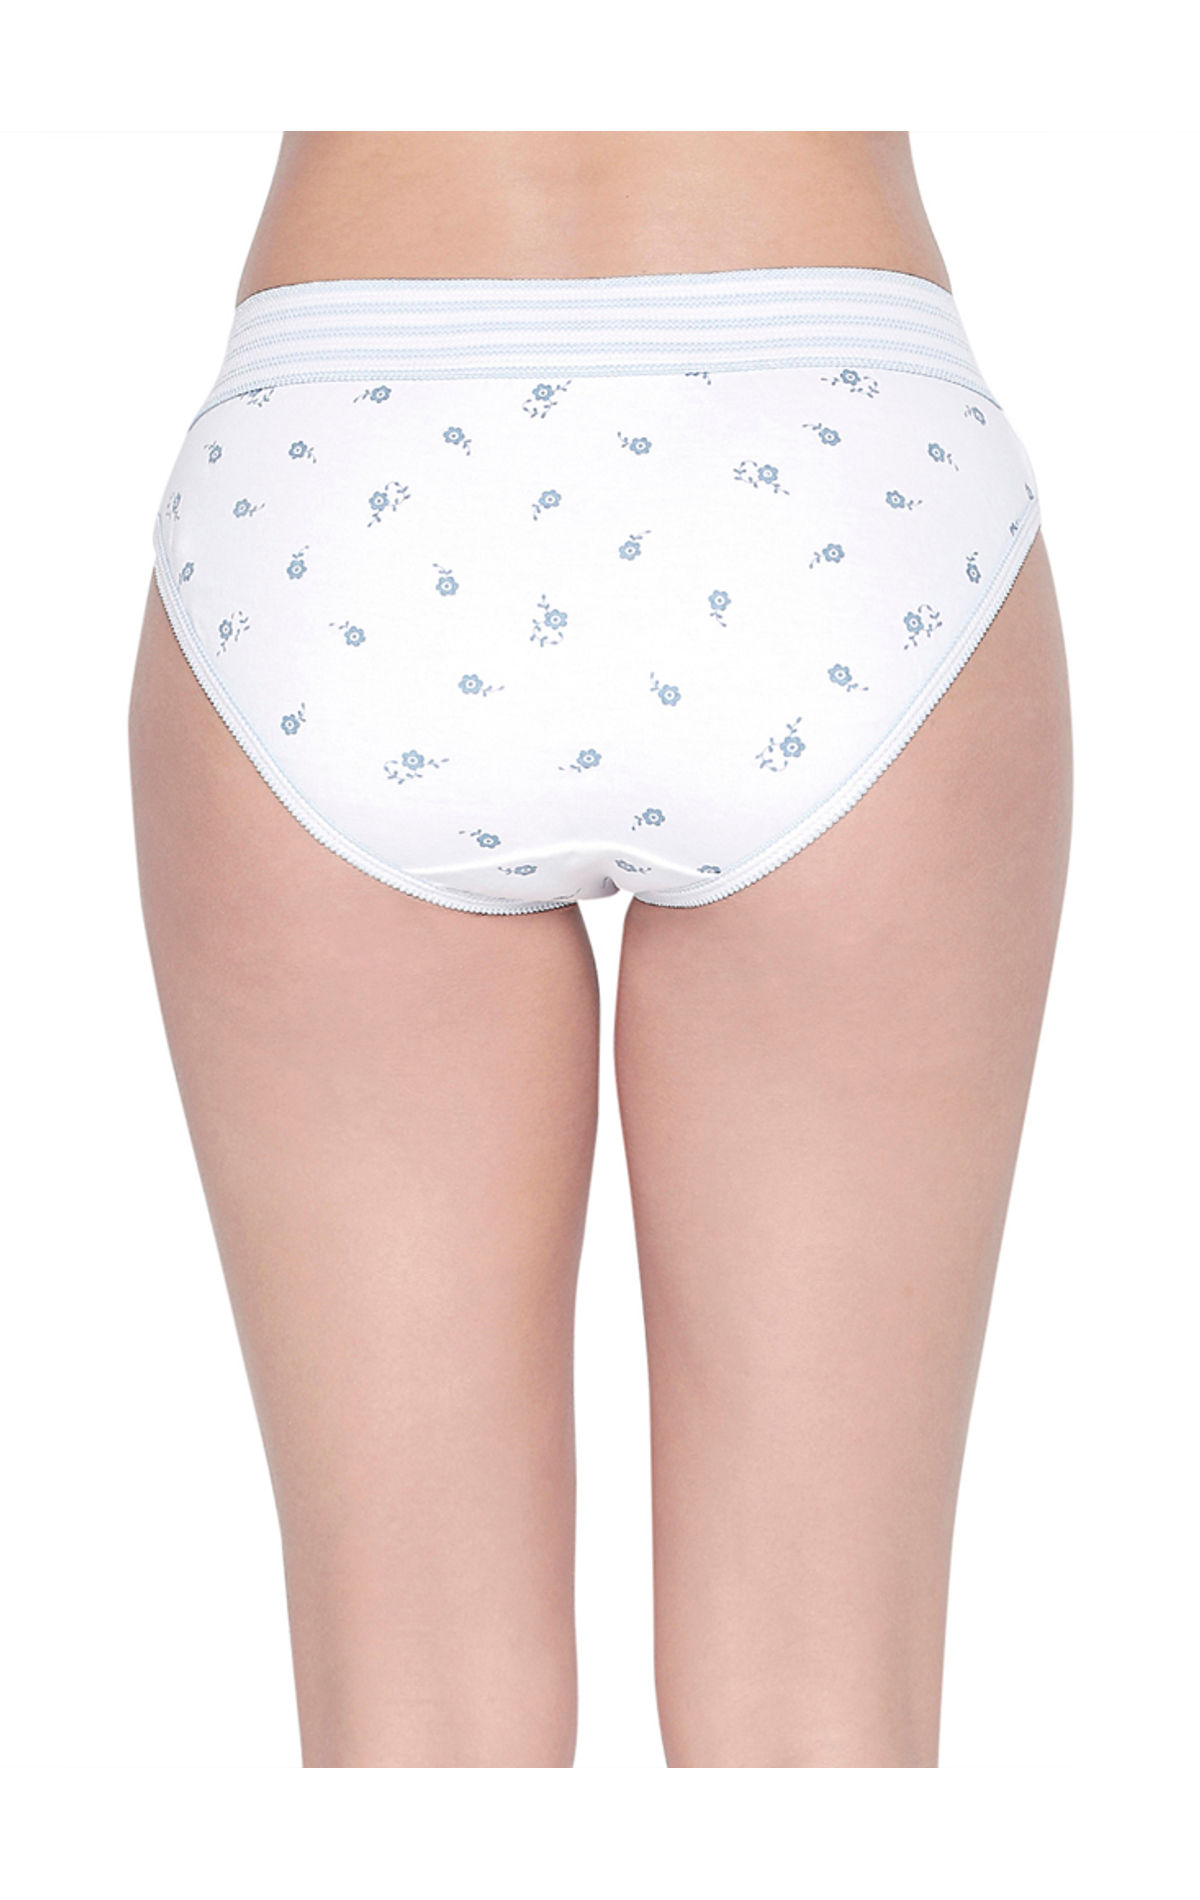 Combed Cotton Women Printed Underwear, Type: Briefs at Rs 45/box